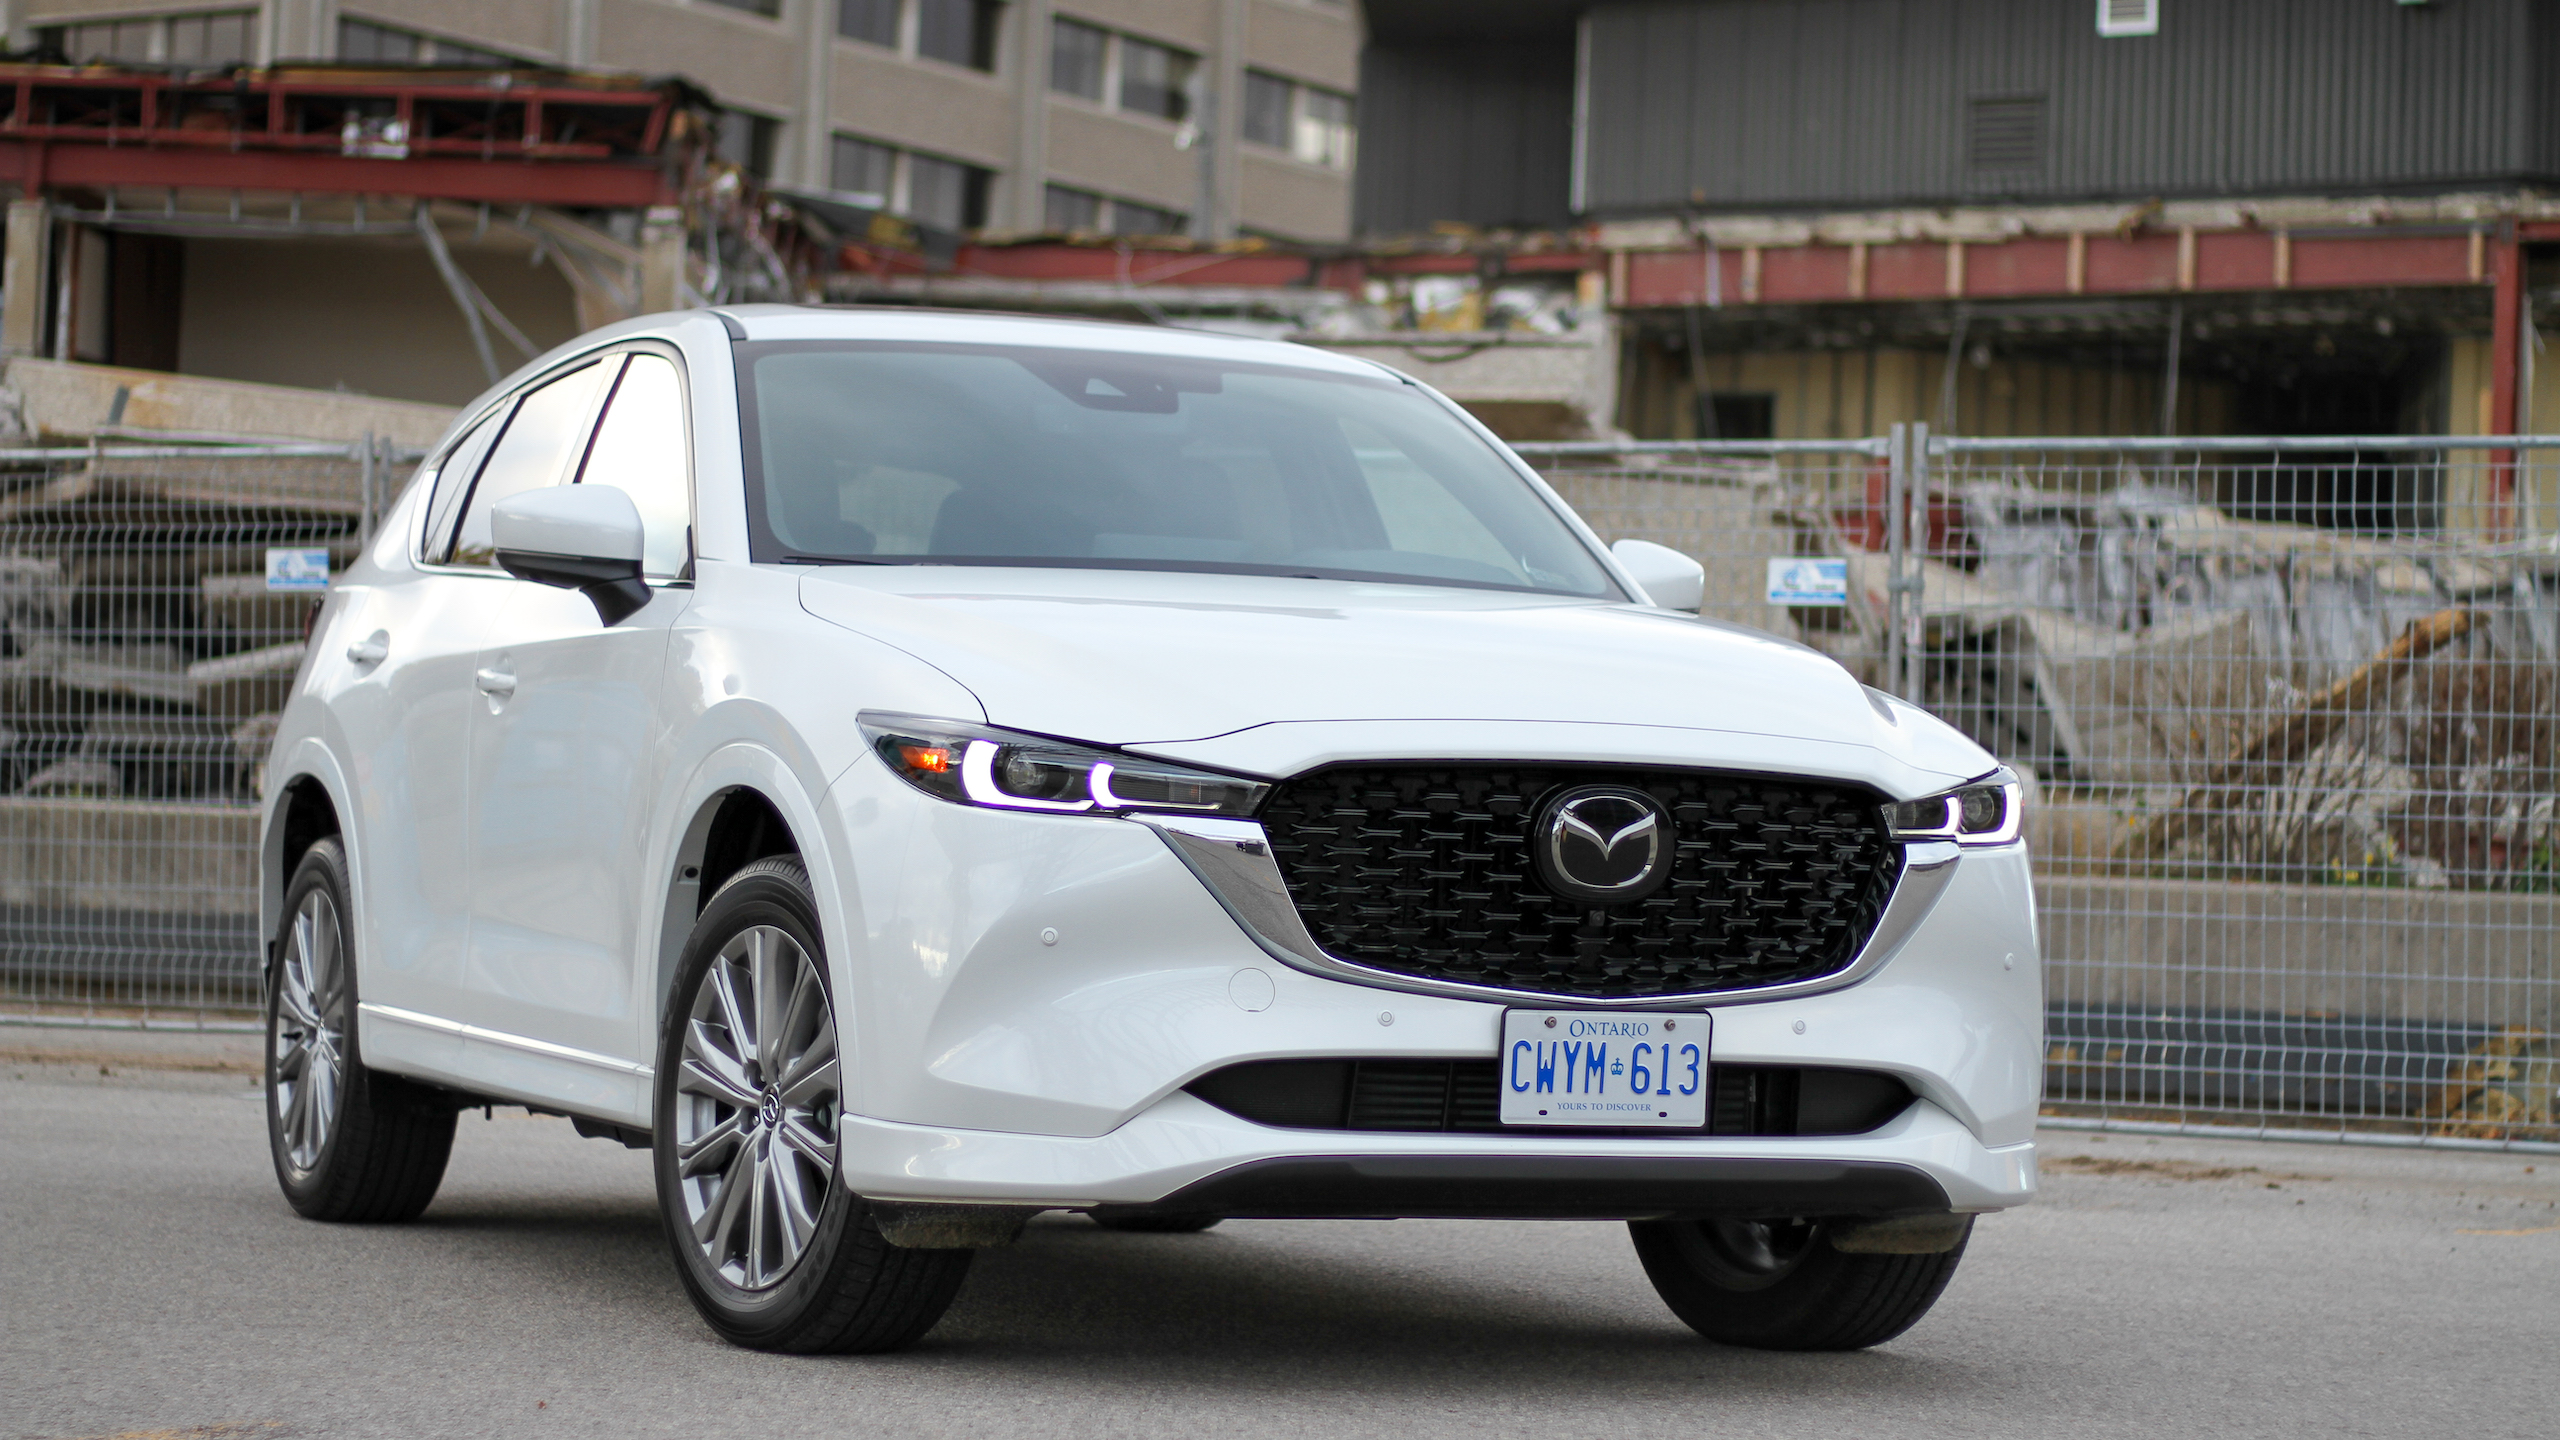 The sports specifications of the new CX-5 are released!